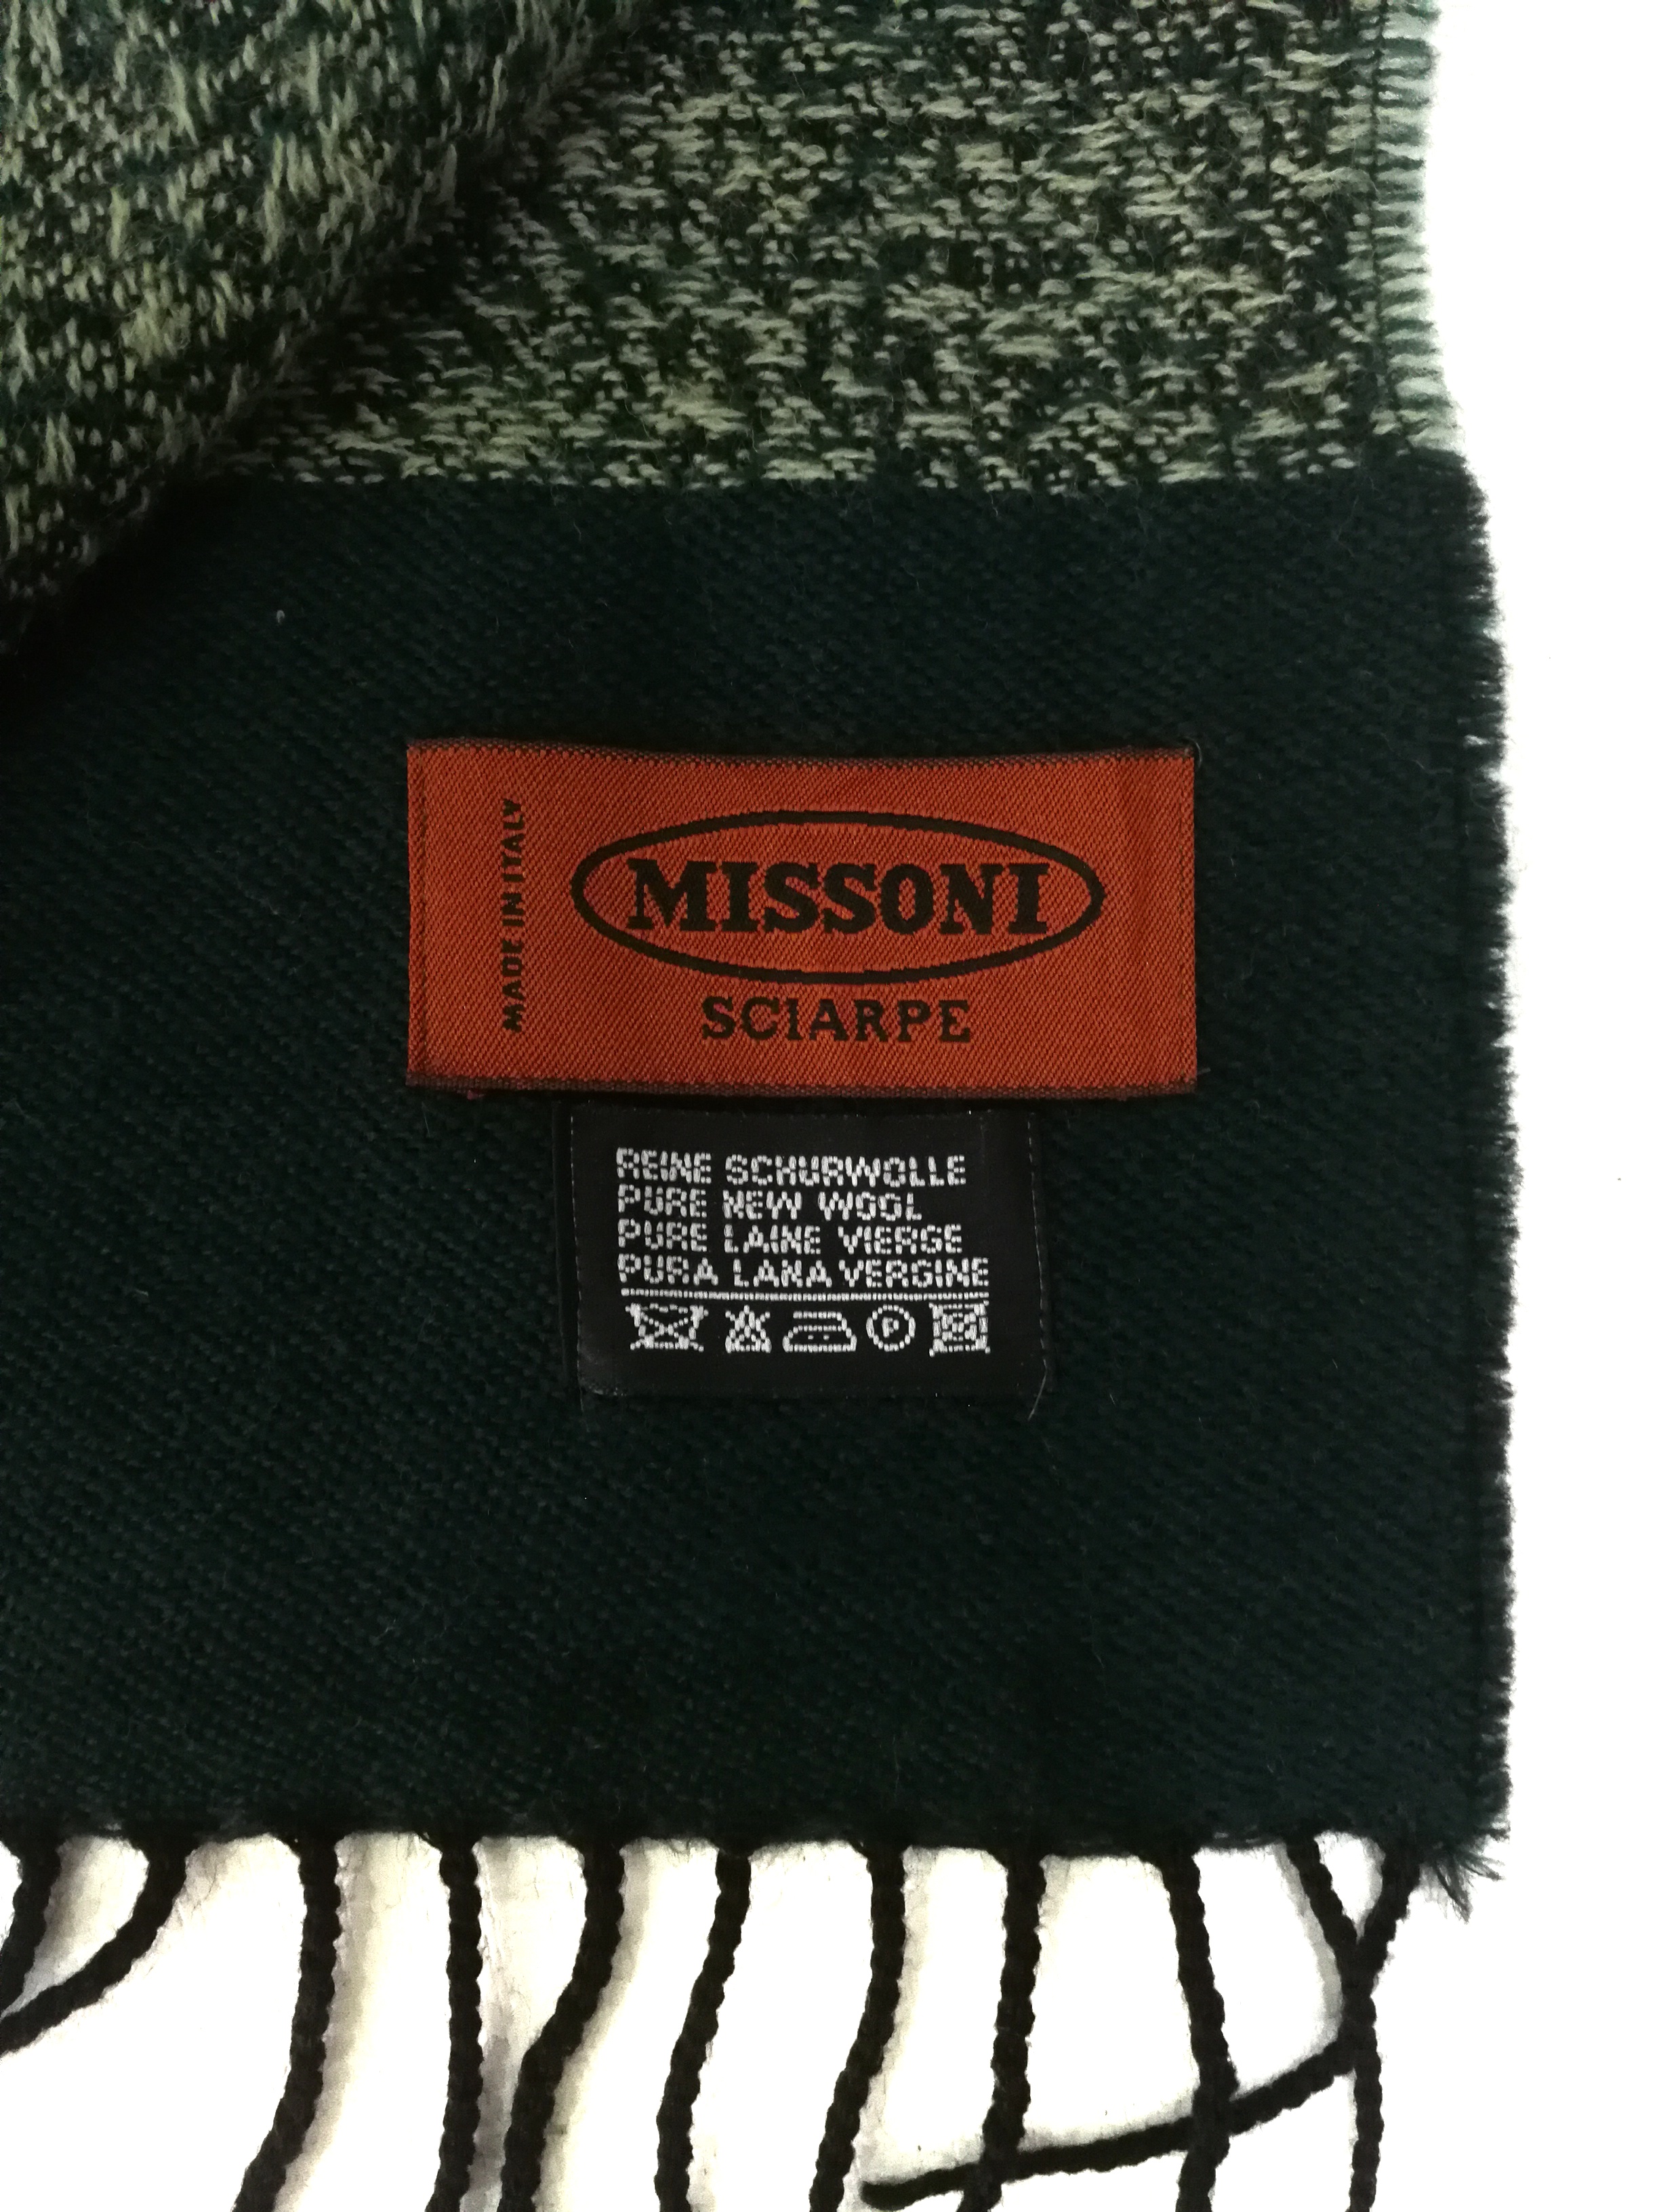 Hot Sale!! Missoni wool scarf very good conditions (SB015) - 4